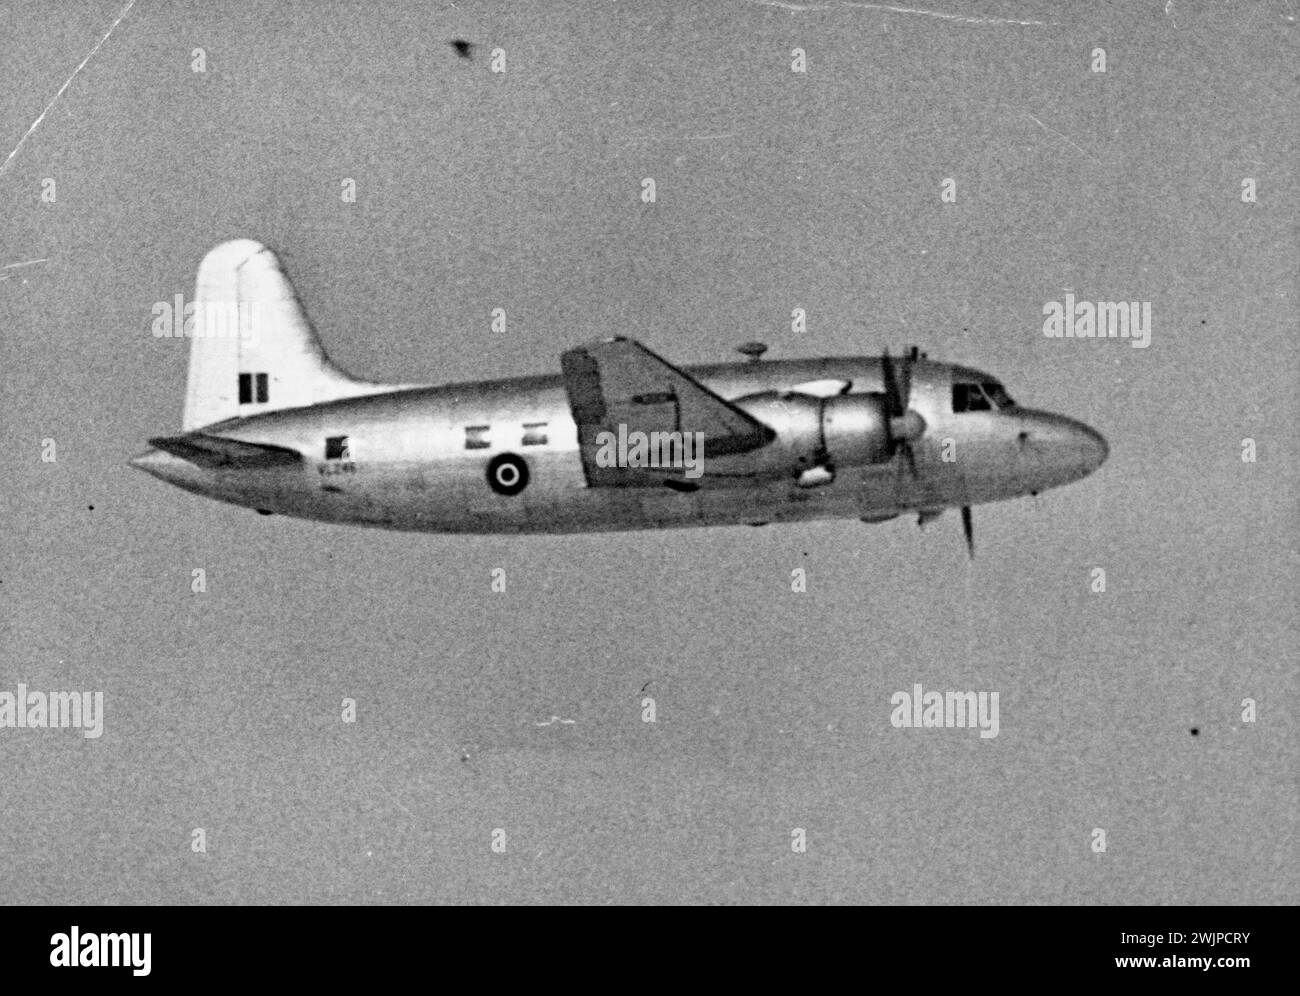 The King's Plane -- The King's plane, one of the four Vikings, in flight during final preparations for the tour. A Royal Flight, comprising four Vickers-Armstrong Viking twin-engined planes, will accompany the Royal Family on their tour of the Dominion of South Africa. January 30, 1947. Stock Photo